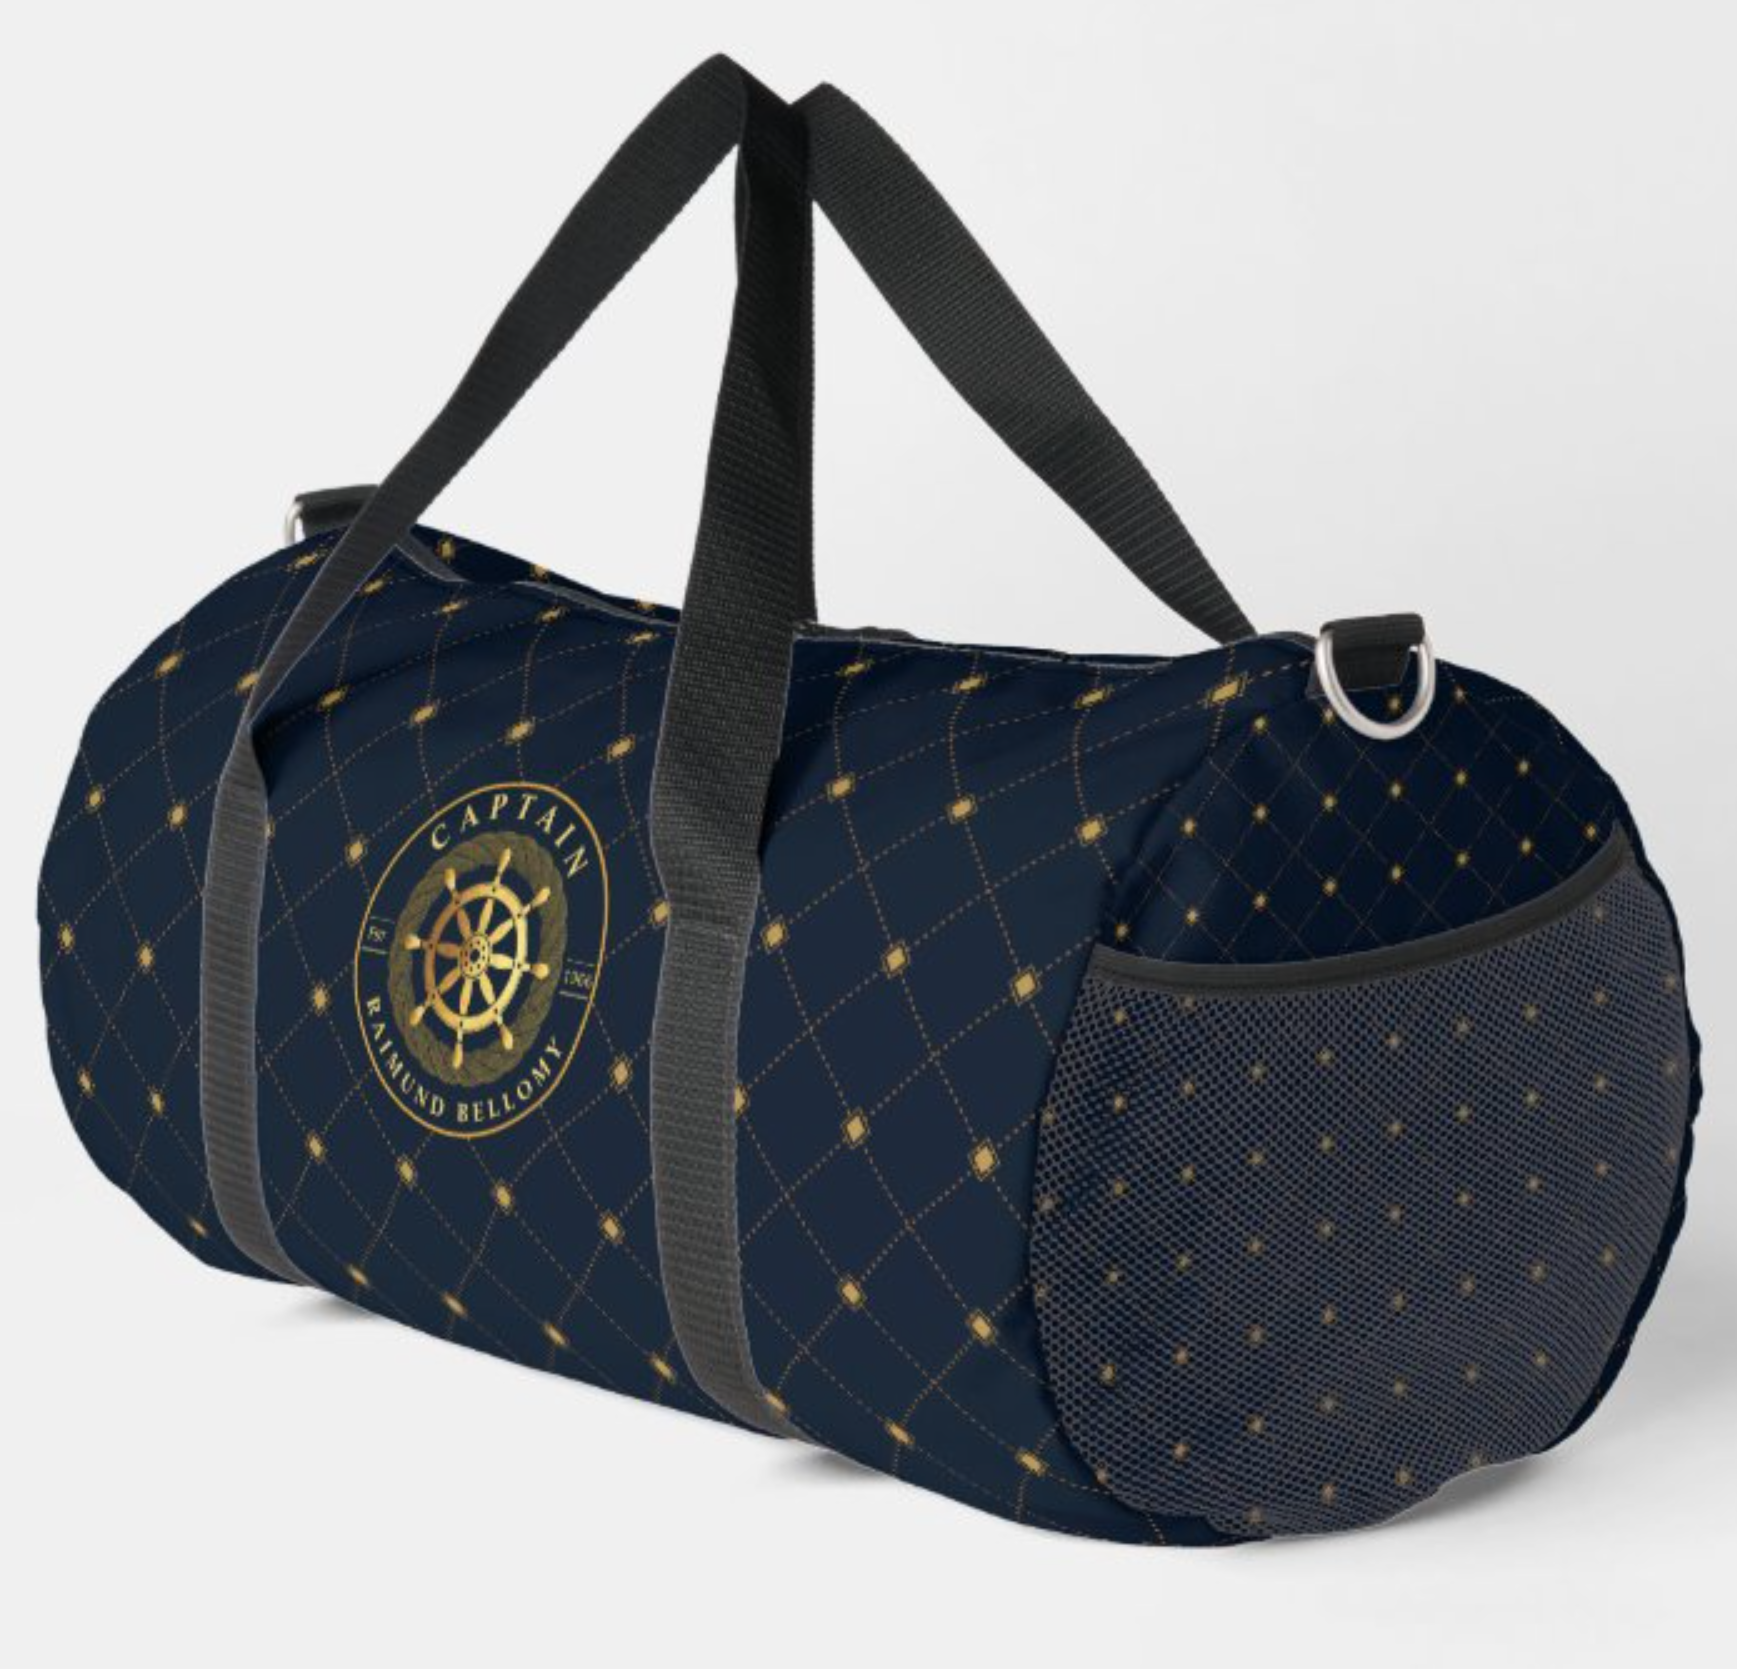 Gold Ship Wheel Duffle Bag Navy blue duffel bag with a quilted design featuring gold stitching, an emblem with the word "CAPTAIN" surrounded by a rope and ship wheel, and a side mesh pocket, with two black shoulder straps.